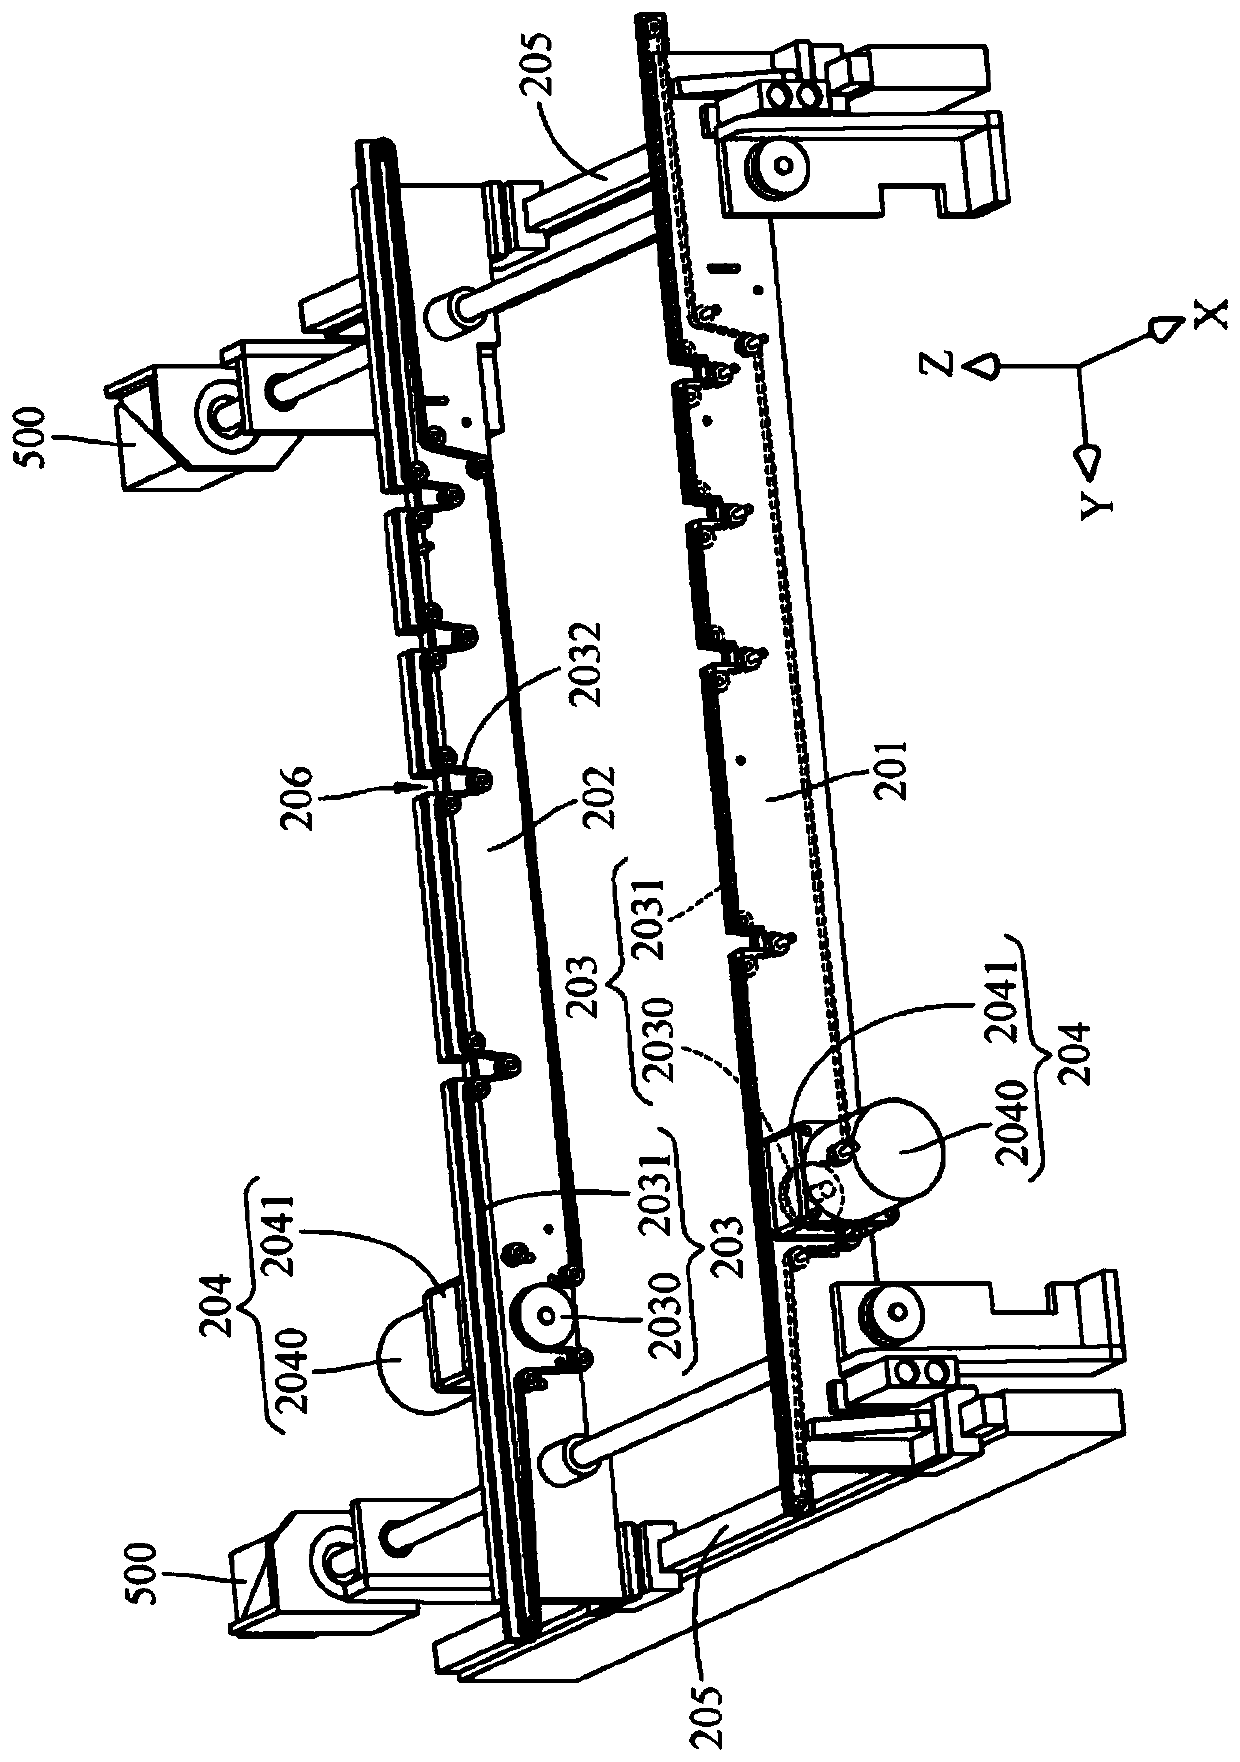 Taking and putting device